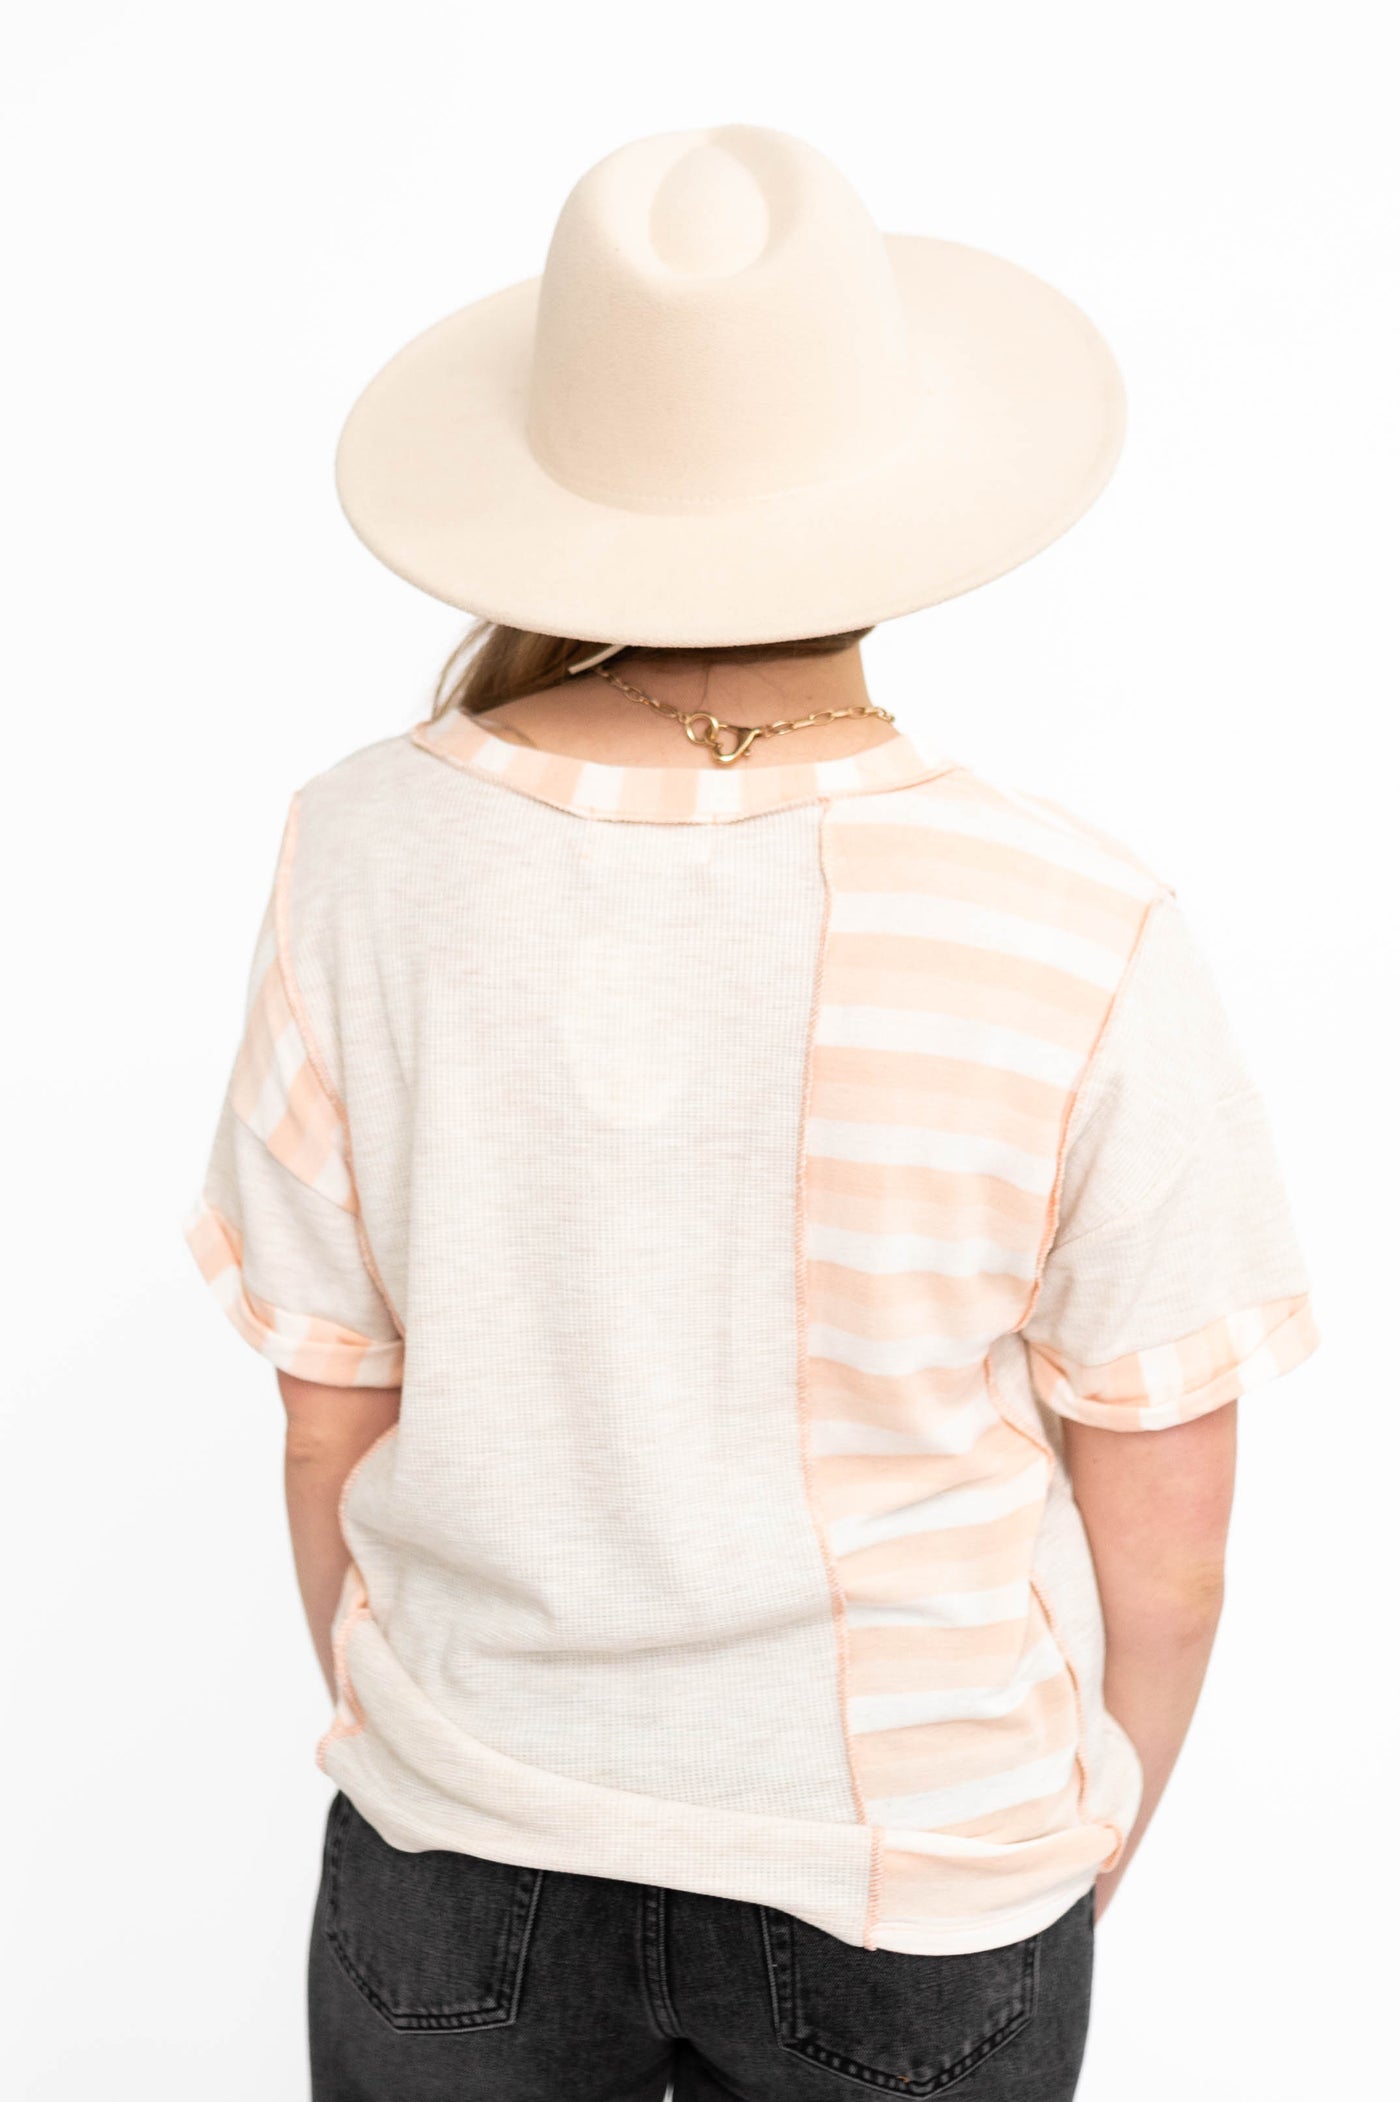 Back view of a oatmeal top